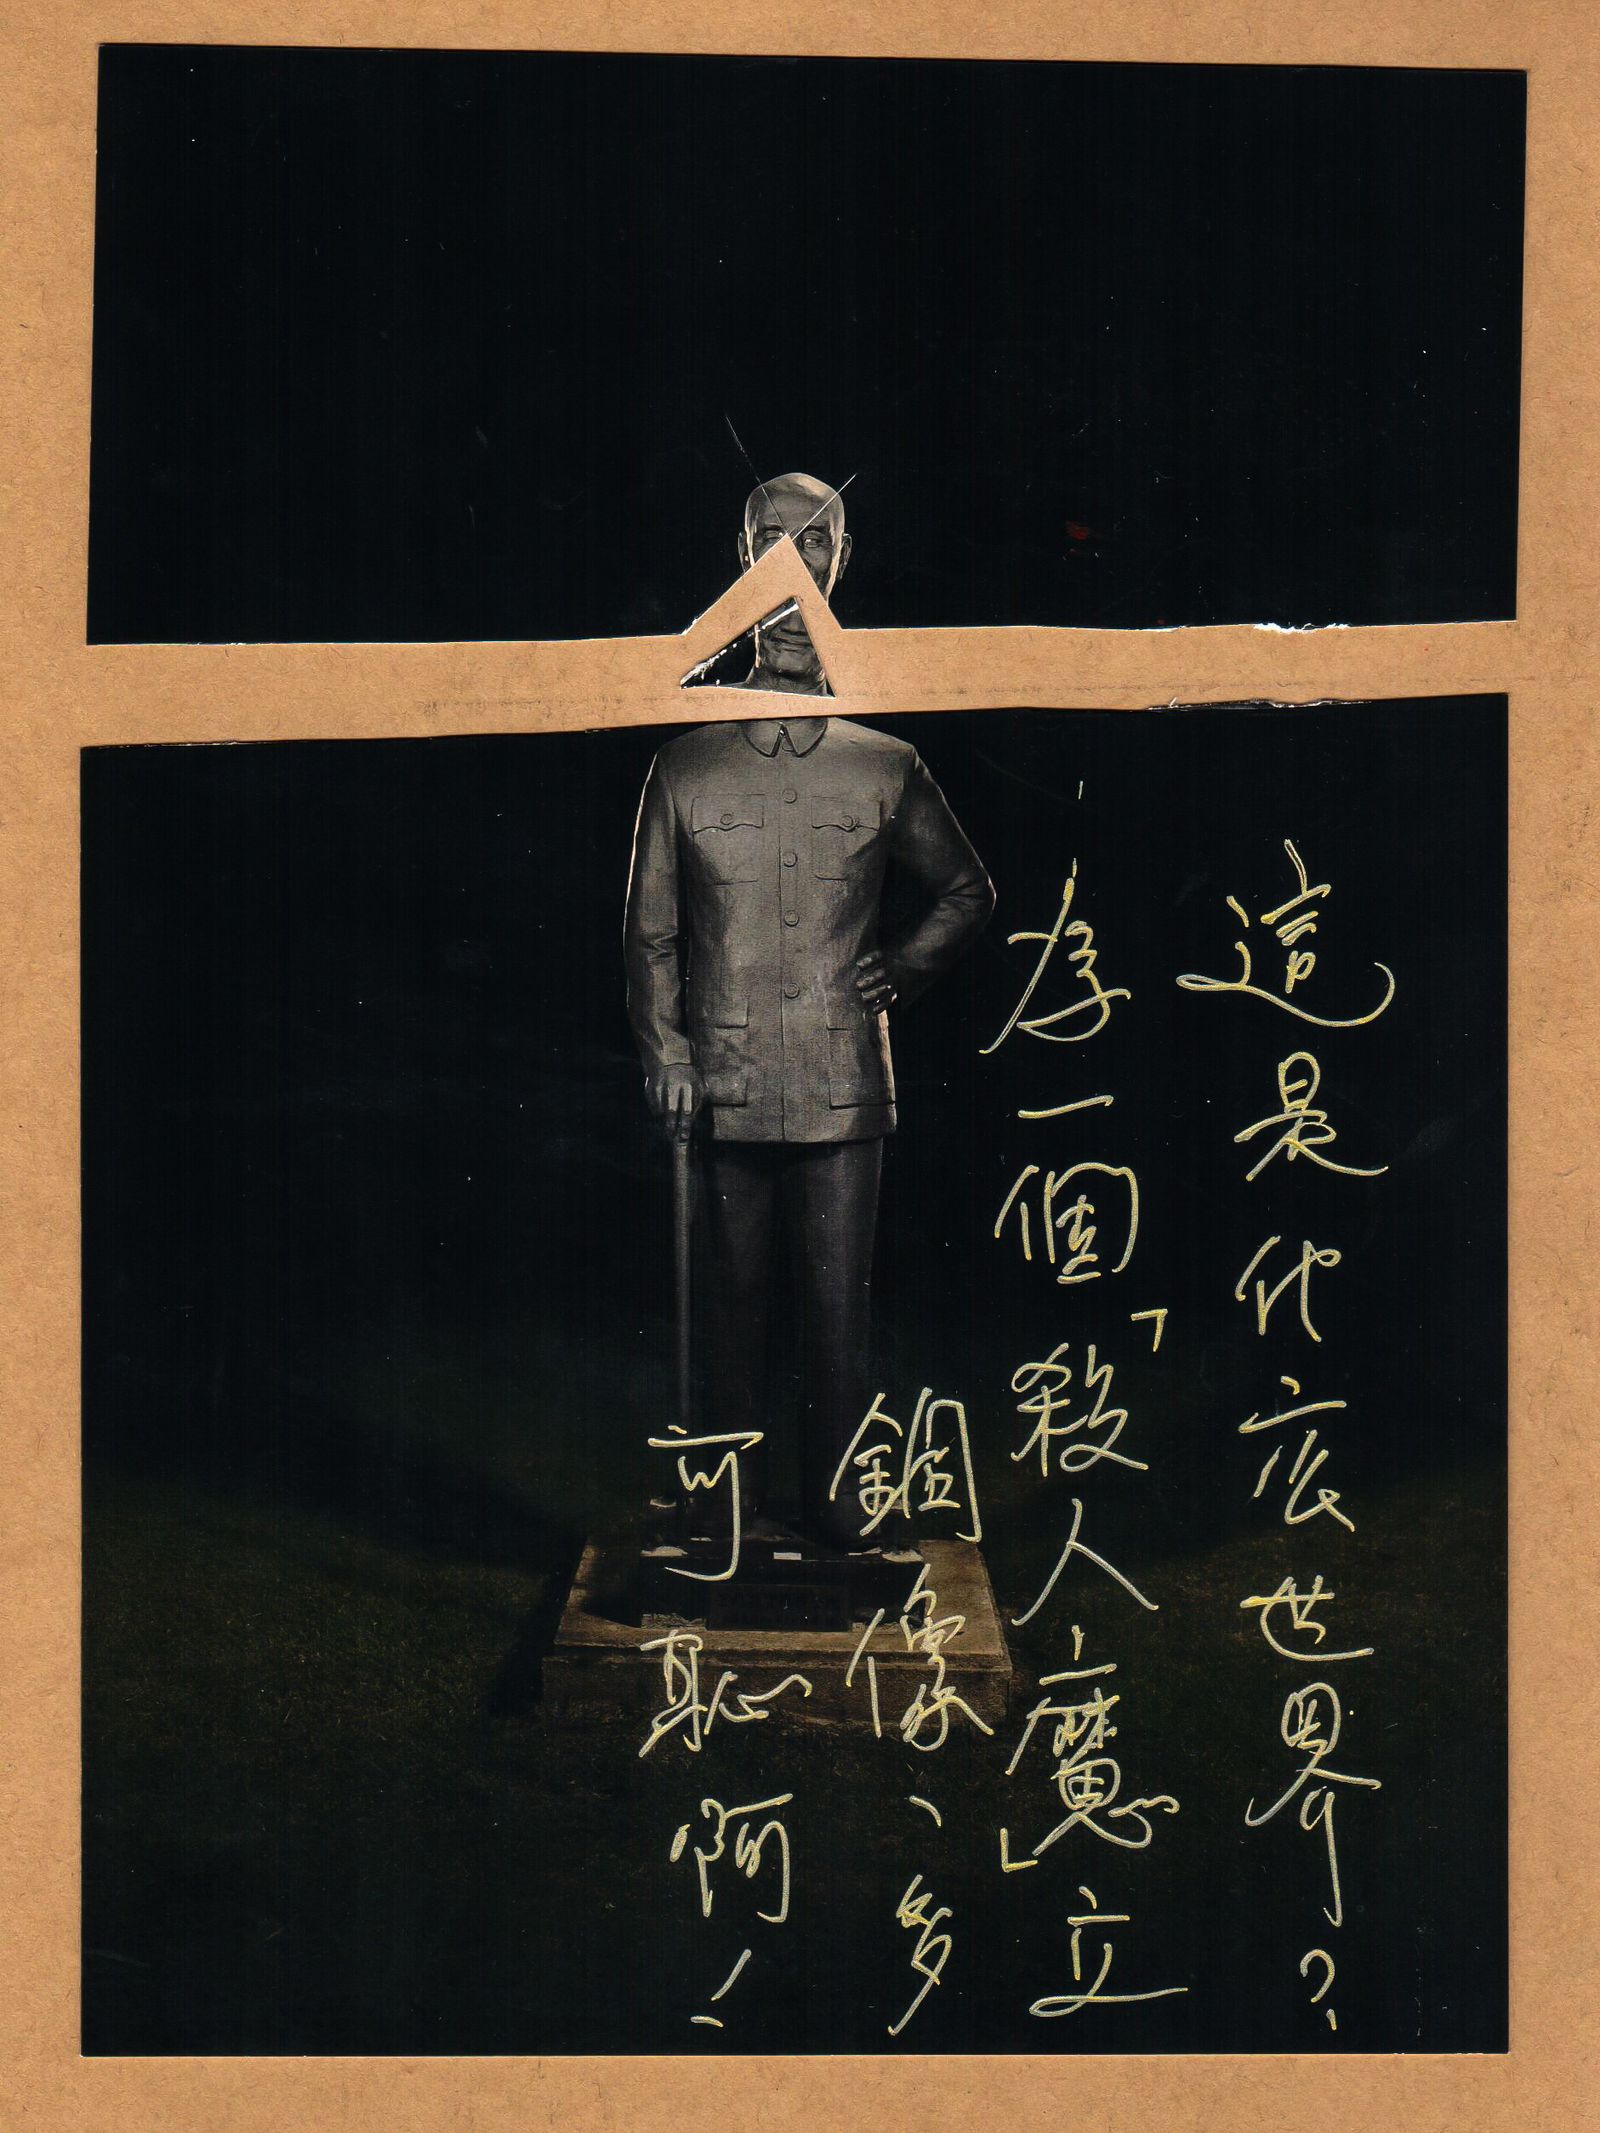 © Billy H.C. Kwok - Image from the Last Letters: A Photographic Investigation of Taiwan White Terror photography project